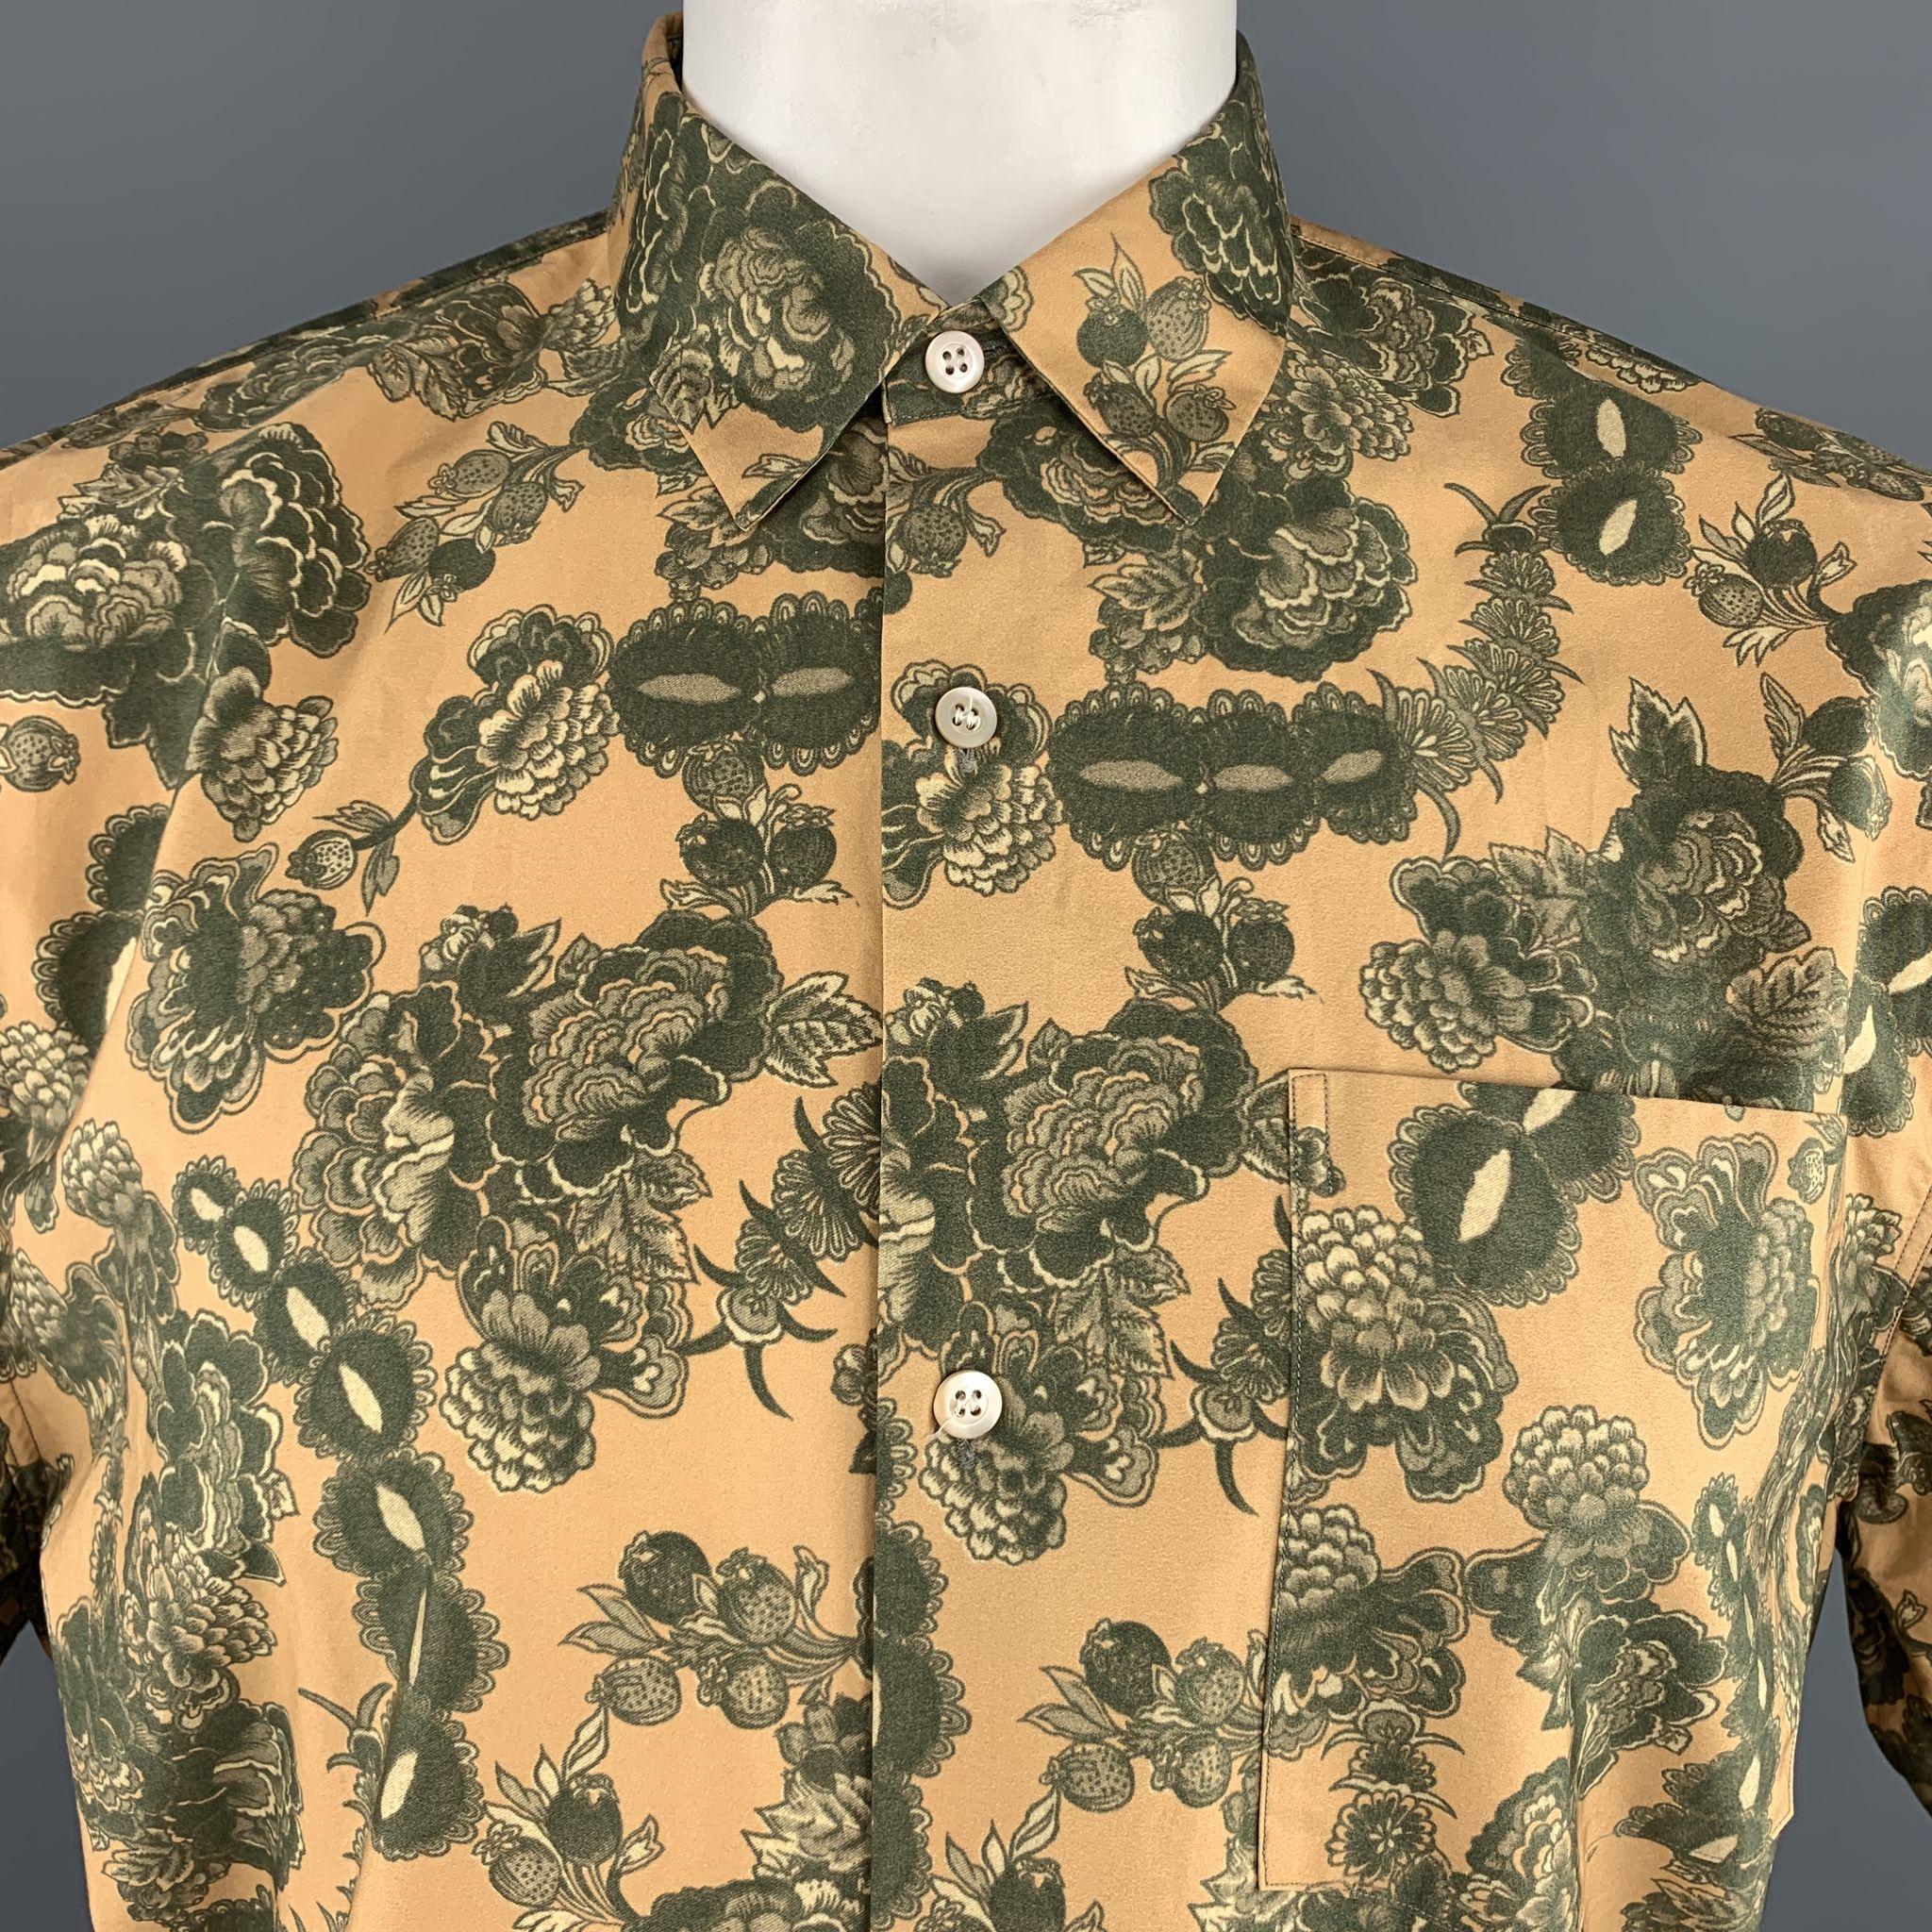 DRIES VAN NOTEN shirt comes in gold and green floral print cotton with a pointed collar, patch breast pocket, short sleeves, and bronze print hem panel. 

Excellent Pre-Owned Condition.
Marked: Extra Large

Measurements:

Shoulder: 21 in.
Chest: 52